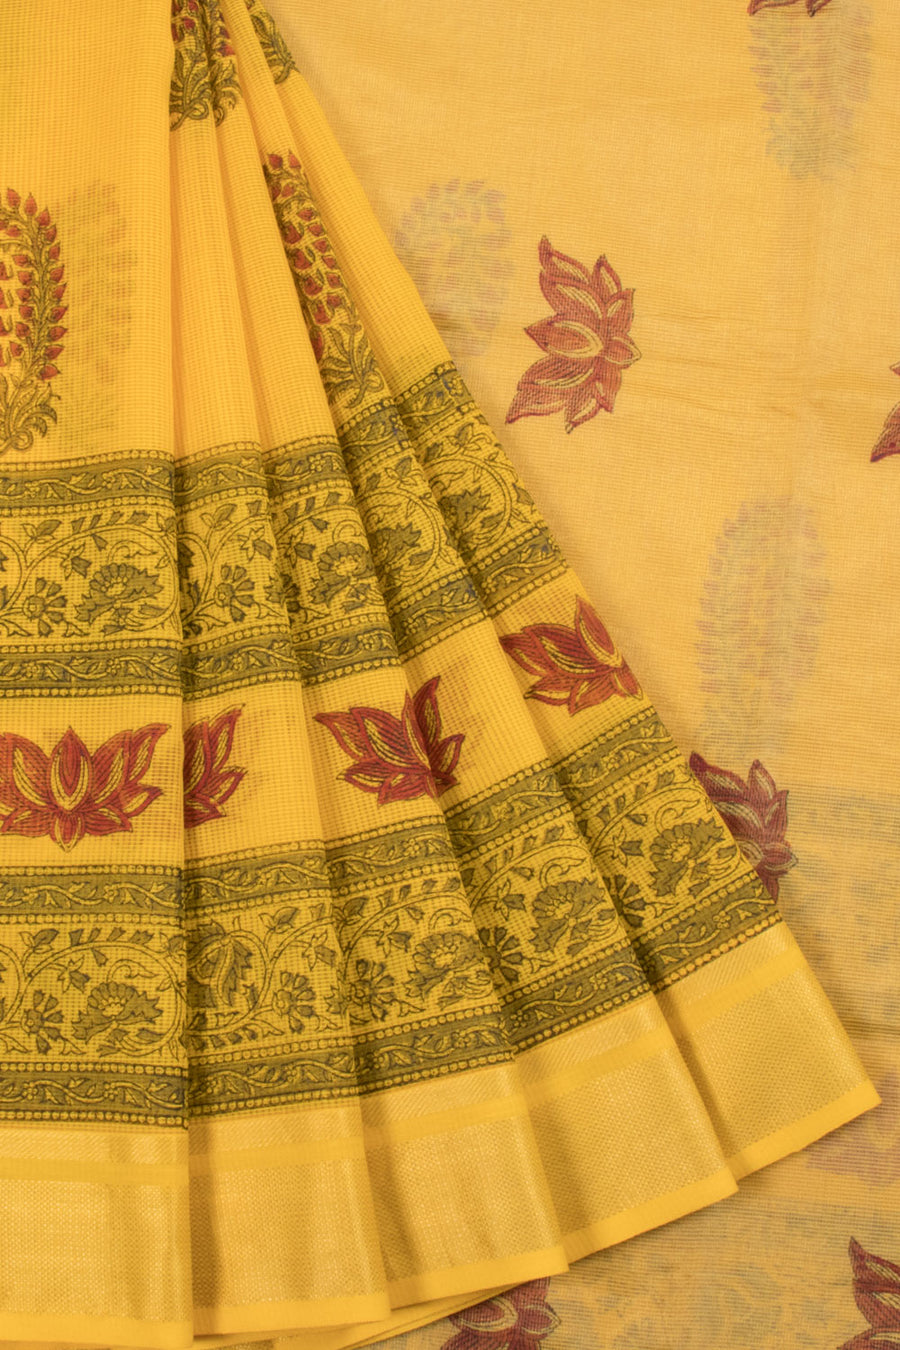 Yellow Hand Block Printed Kota Doria Cotton Saree with Floral Motifs Border, Fancy Tassels and without Blouse 